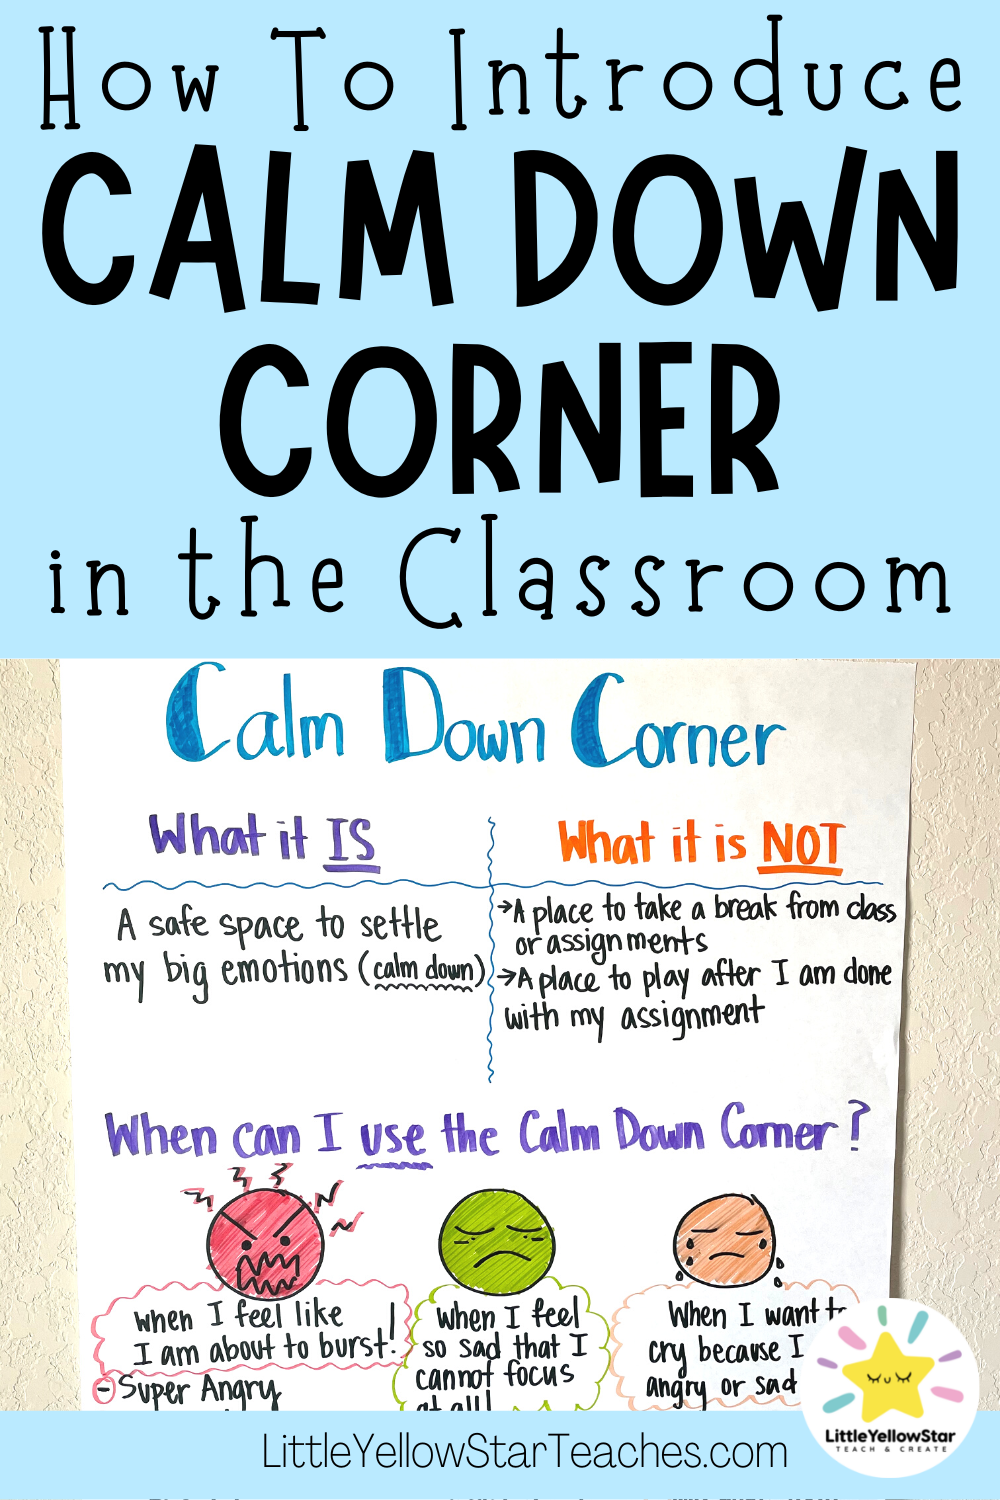 How To Introduce A Calm Down Corner in Classroom - LittleYellowStar